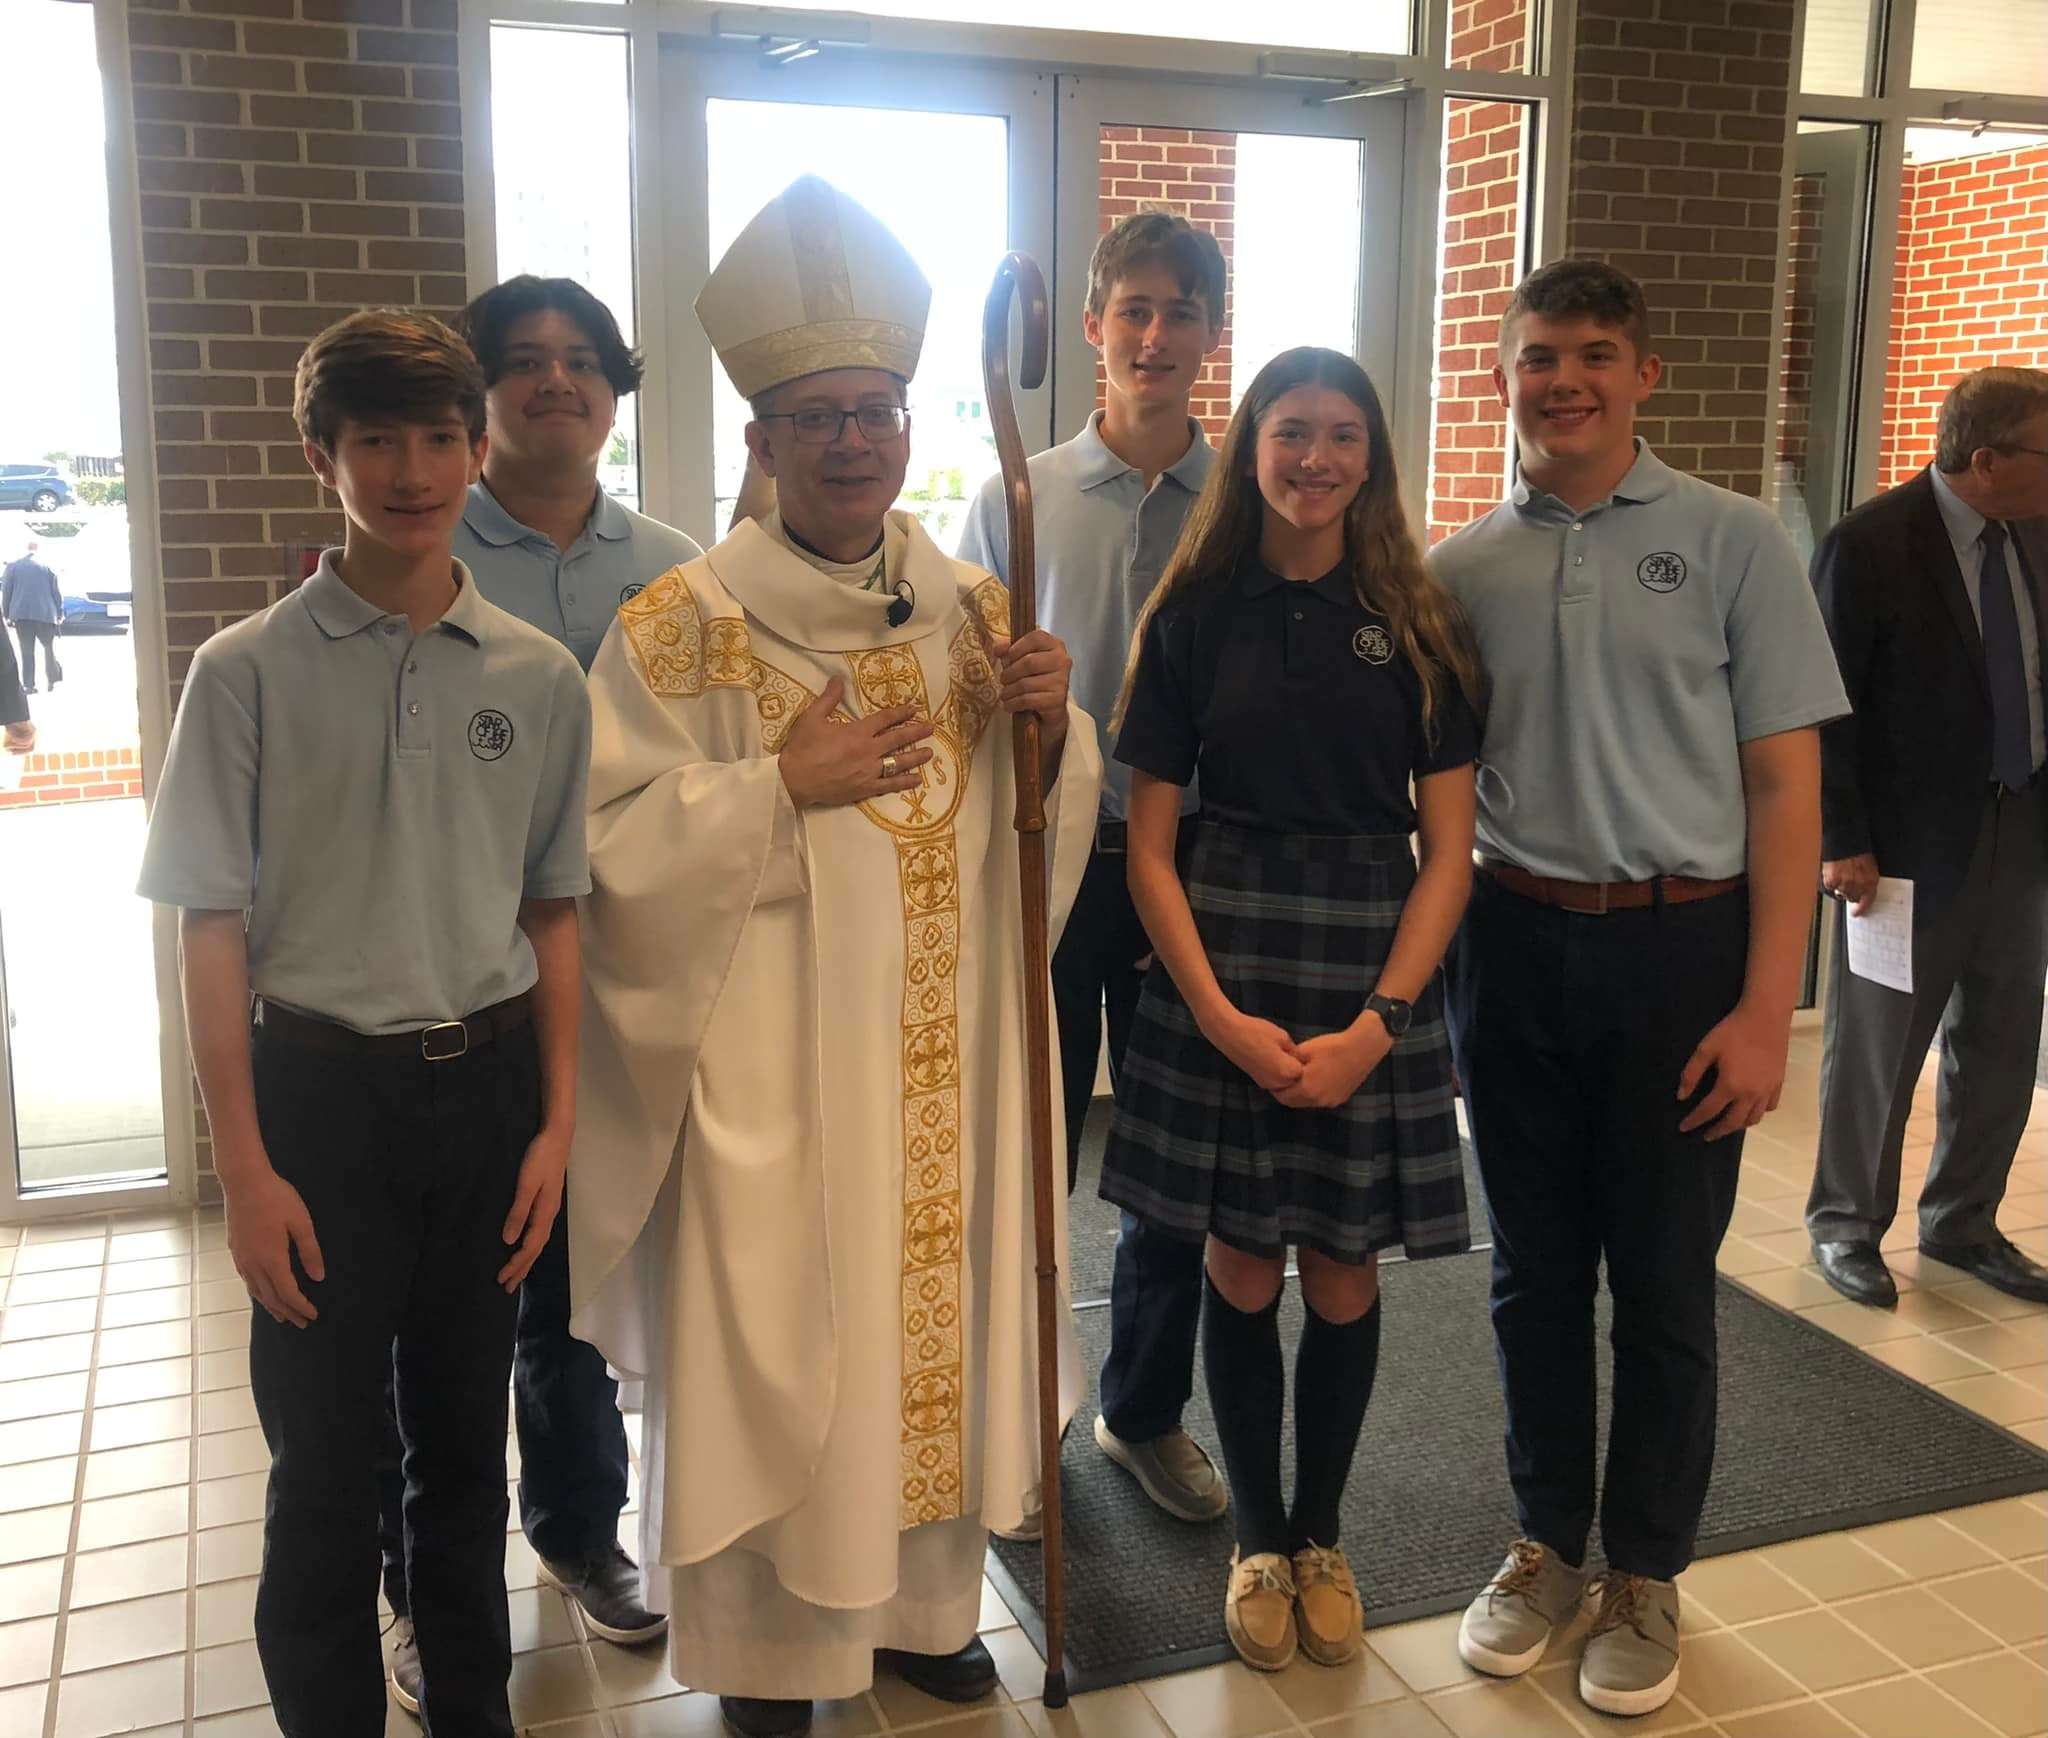 Bishop Barry and 8th graders